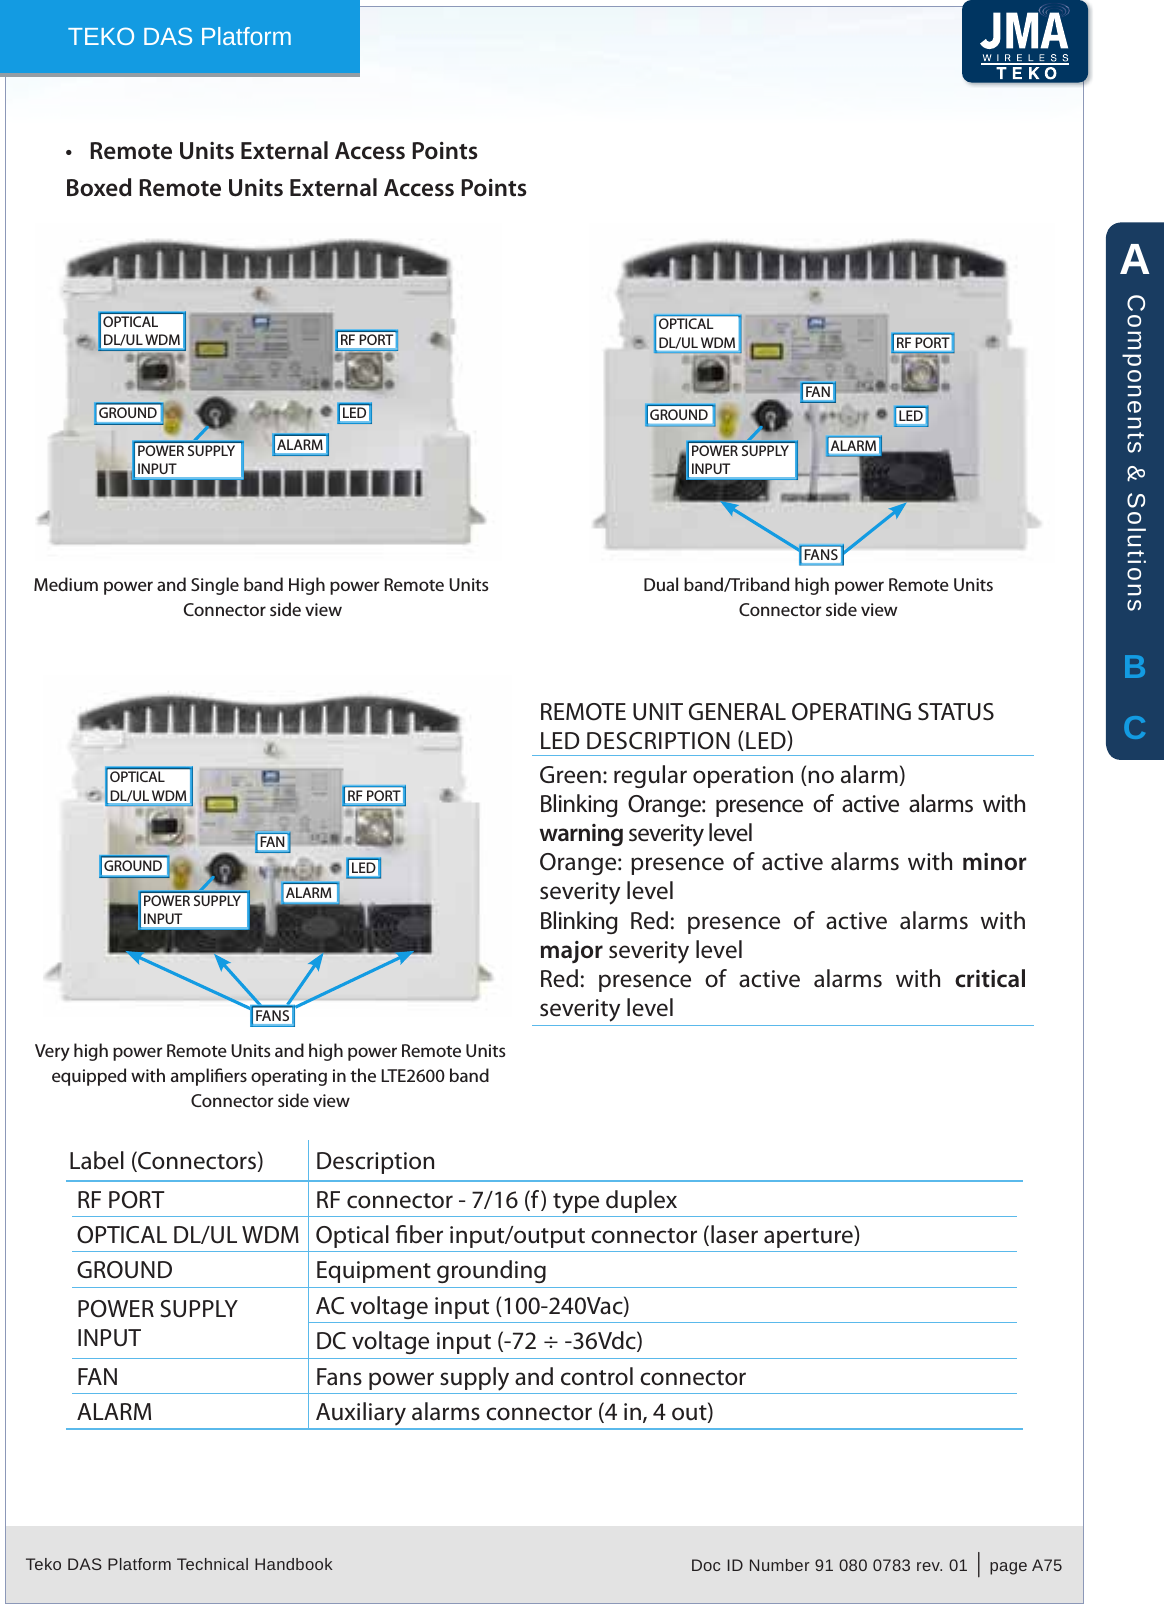 Teko DAS Platform Technical Handbook Doc ID Number 91 080 0783 rev. 01  |  page A75TEKO DAS PlatformRemote Units External Access Points•Boxed Remote Units External Access PointsGROUNDOPTICALDL/UL WDMALARMRF PORTLEDMedium power and Single band High power Remote UnitsConnector side viewGROUNDOPTICALDL/UL WDMALARMRF PORTLEDFANFANSDual band/Triband high power Remote Units Connector side viewVery high power Remote Units and high power Remote Units equipped with ampliers operating in the LTE2600 bandConnector side viewGROUNDOPTICALDL/UL WDMALARMRF PORTLEDFANFANSREMOTE UNIT GENERAL OPERATING STATUS LED DESCRIPTION LEDGreen: regular operation (no alarm)Blinking  Orange:  presence  of  active  alarms  with warning severity levelOrange: presence of  active alarms with  minor severity levelBlinking  Red:  presence  of  active  alarms  with major severity levelRed:  presence  of  active  alarms  with  critical severity levelPOWER SUPPLYINPUTPOWER SUPPLYINPUTPOWER SUPPLYINPUTLabel (Connectors) DescriptionRF PORT RF connector - 7/16 (f) type duplexOPTICAL DL/UL WDM Optical ber input/output connector (laser aperture)GROUND Equipment groundingPOWER SUPPLYINPUTAC voltage input (100-240Vac) DC voltage input (-72 ÷ -36Vdc) FAN Fans power supply and control connectorALARM Auxiliary alarms connector (4 in, 4 out)ABCComponents &amp; Solutions